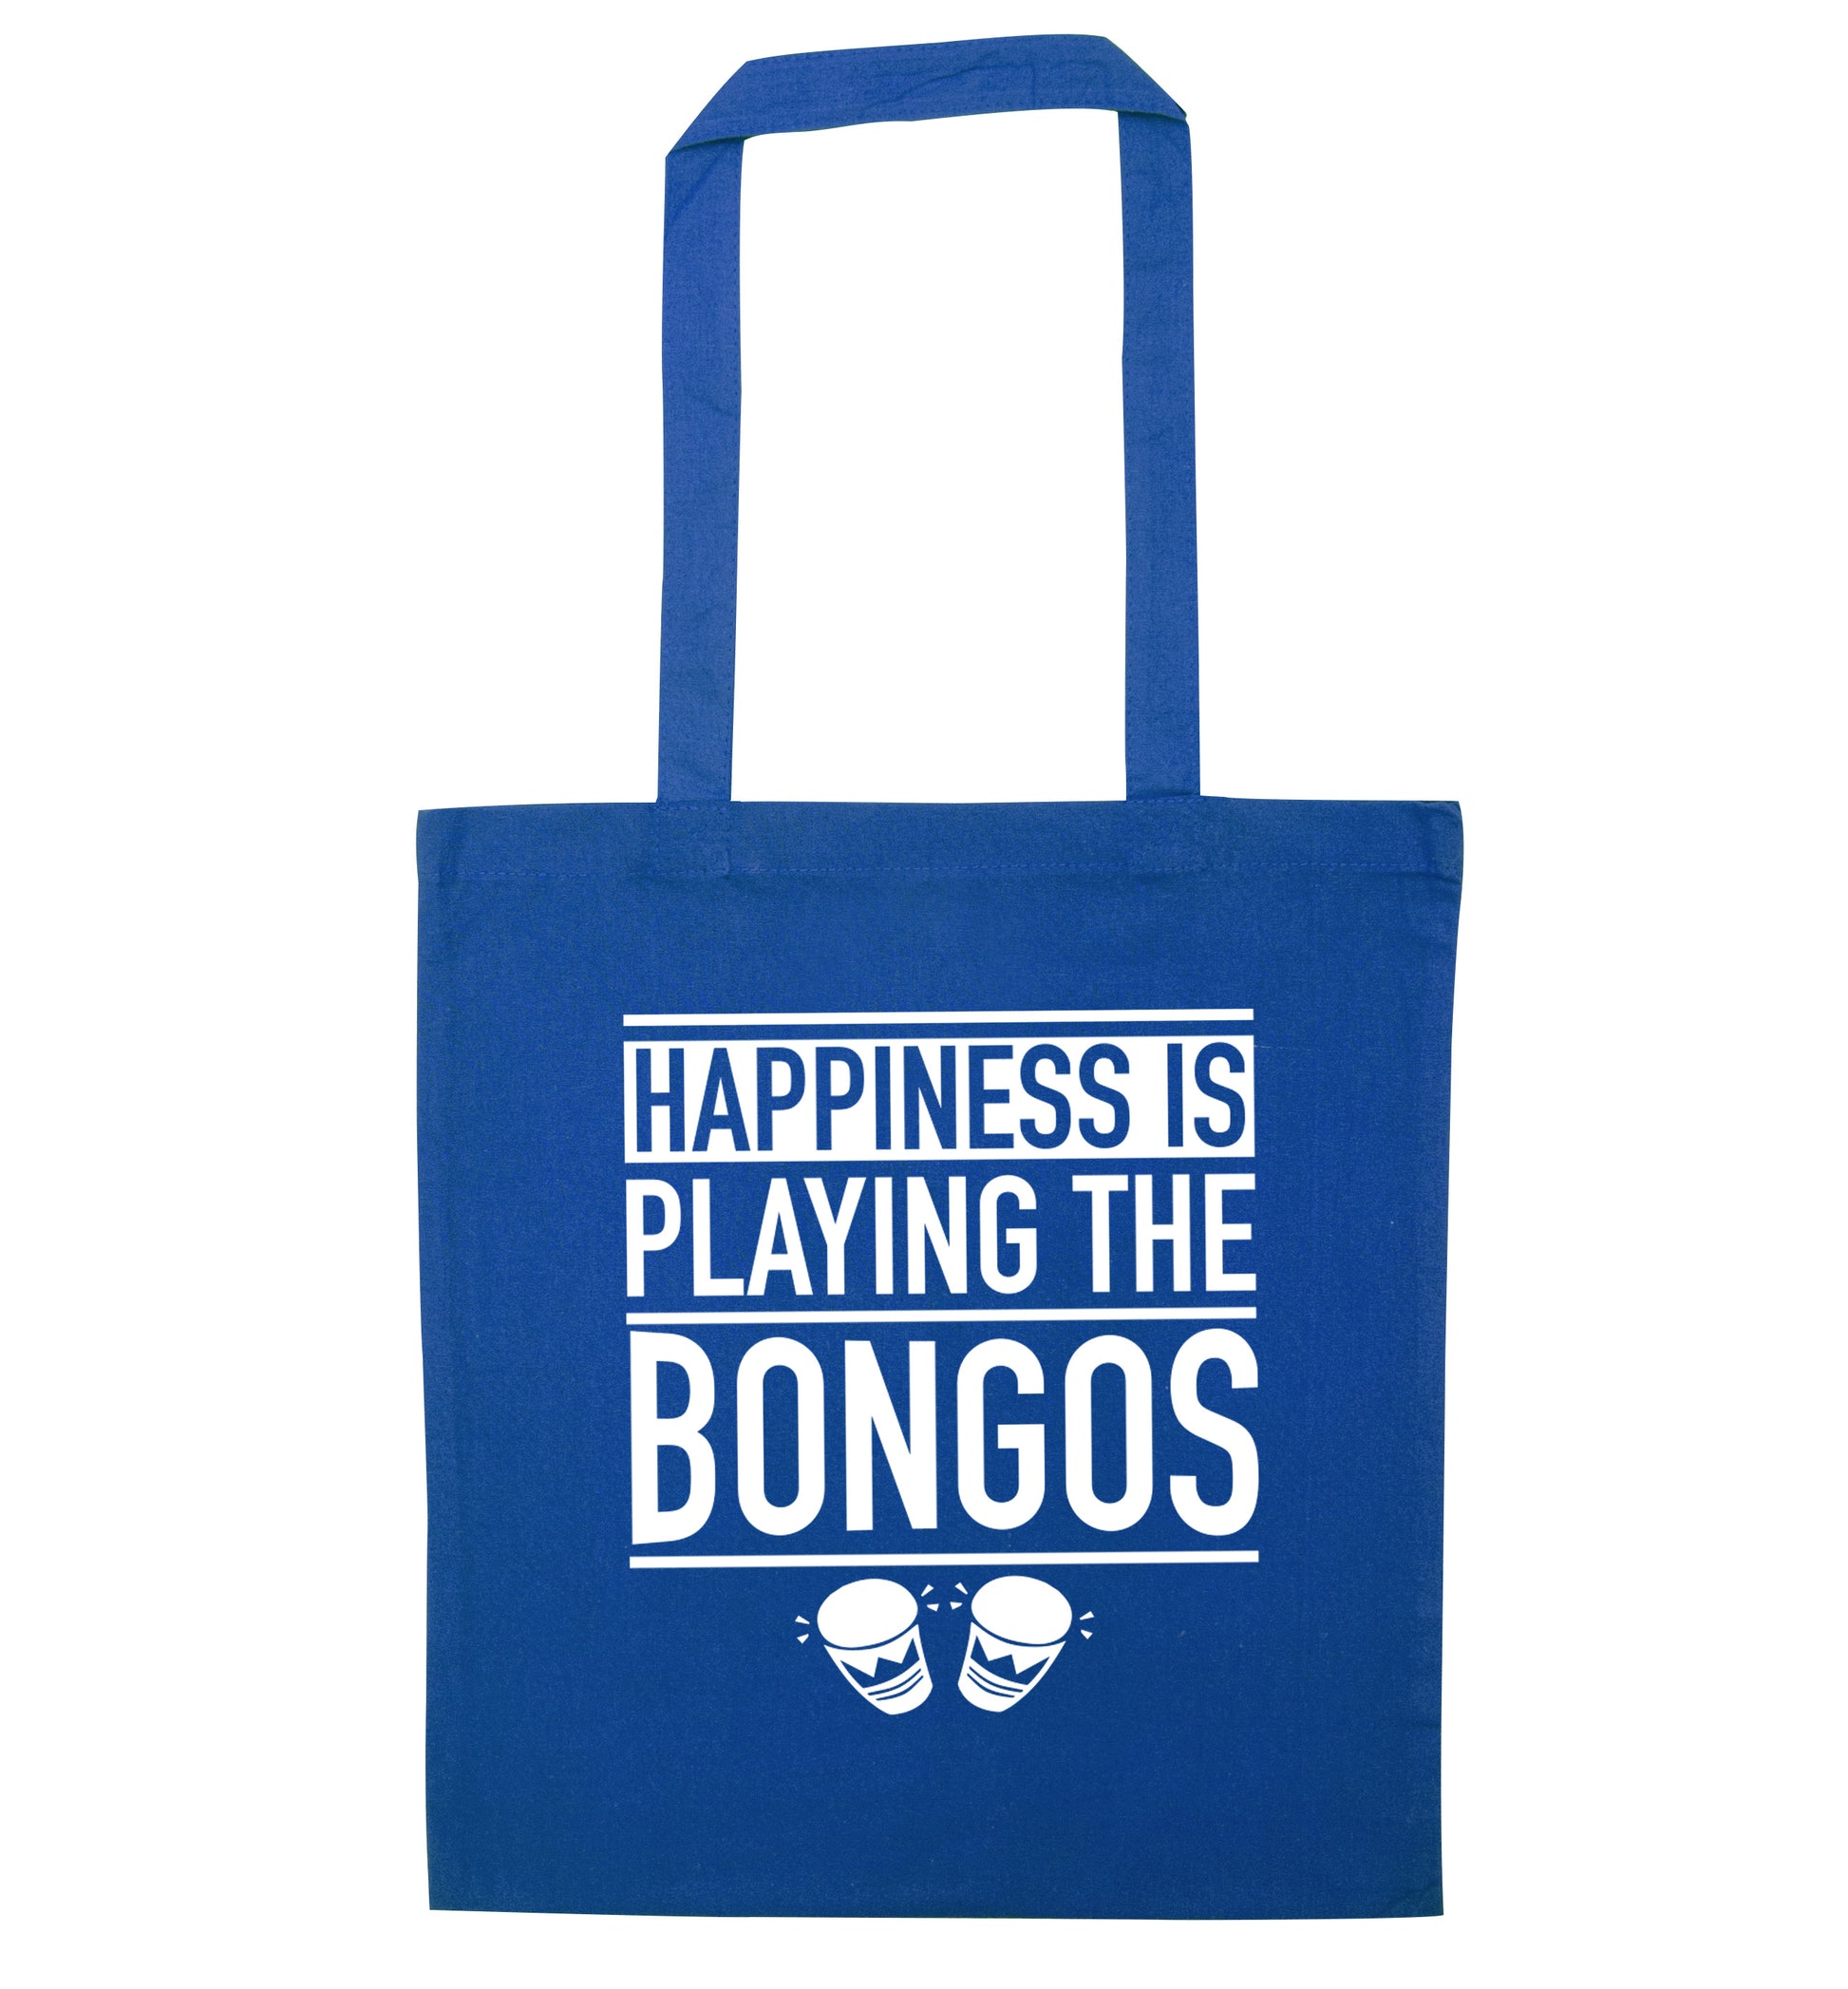 Happiness is playing the bongos blue tote bag